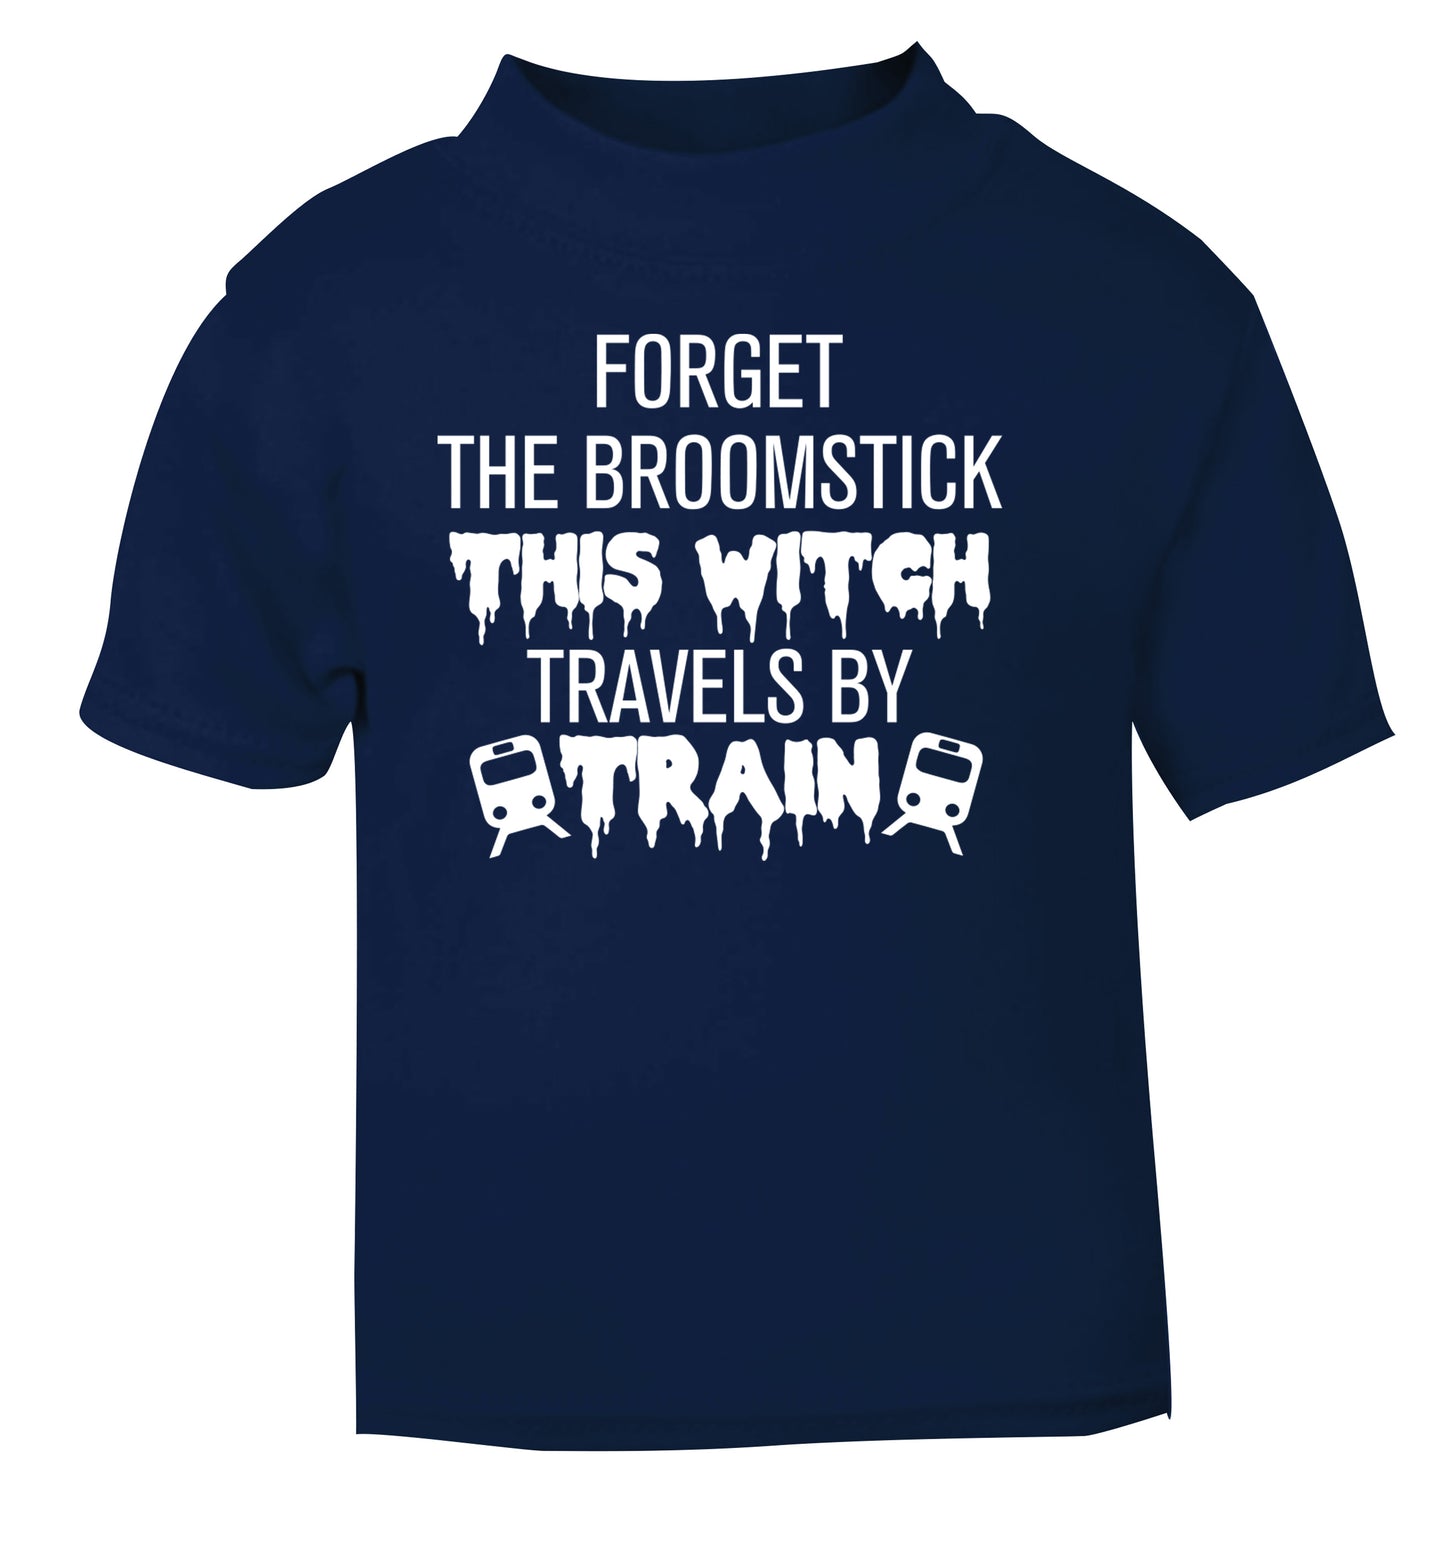 Forget the broomstick this witch travels by train navy Baby Toddler Tshirt 2 Years